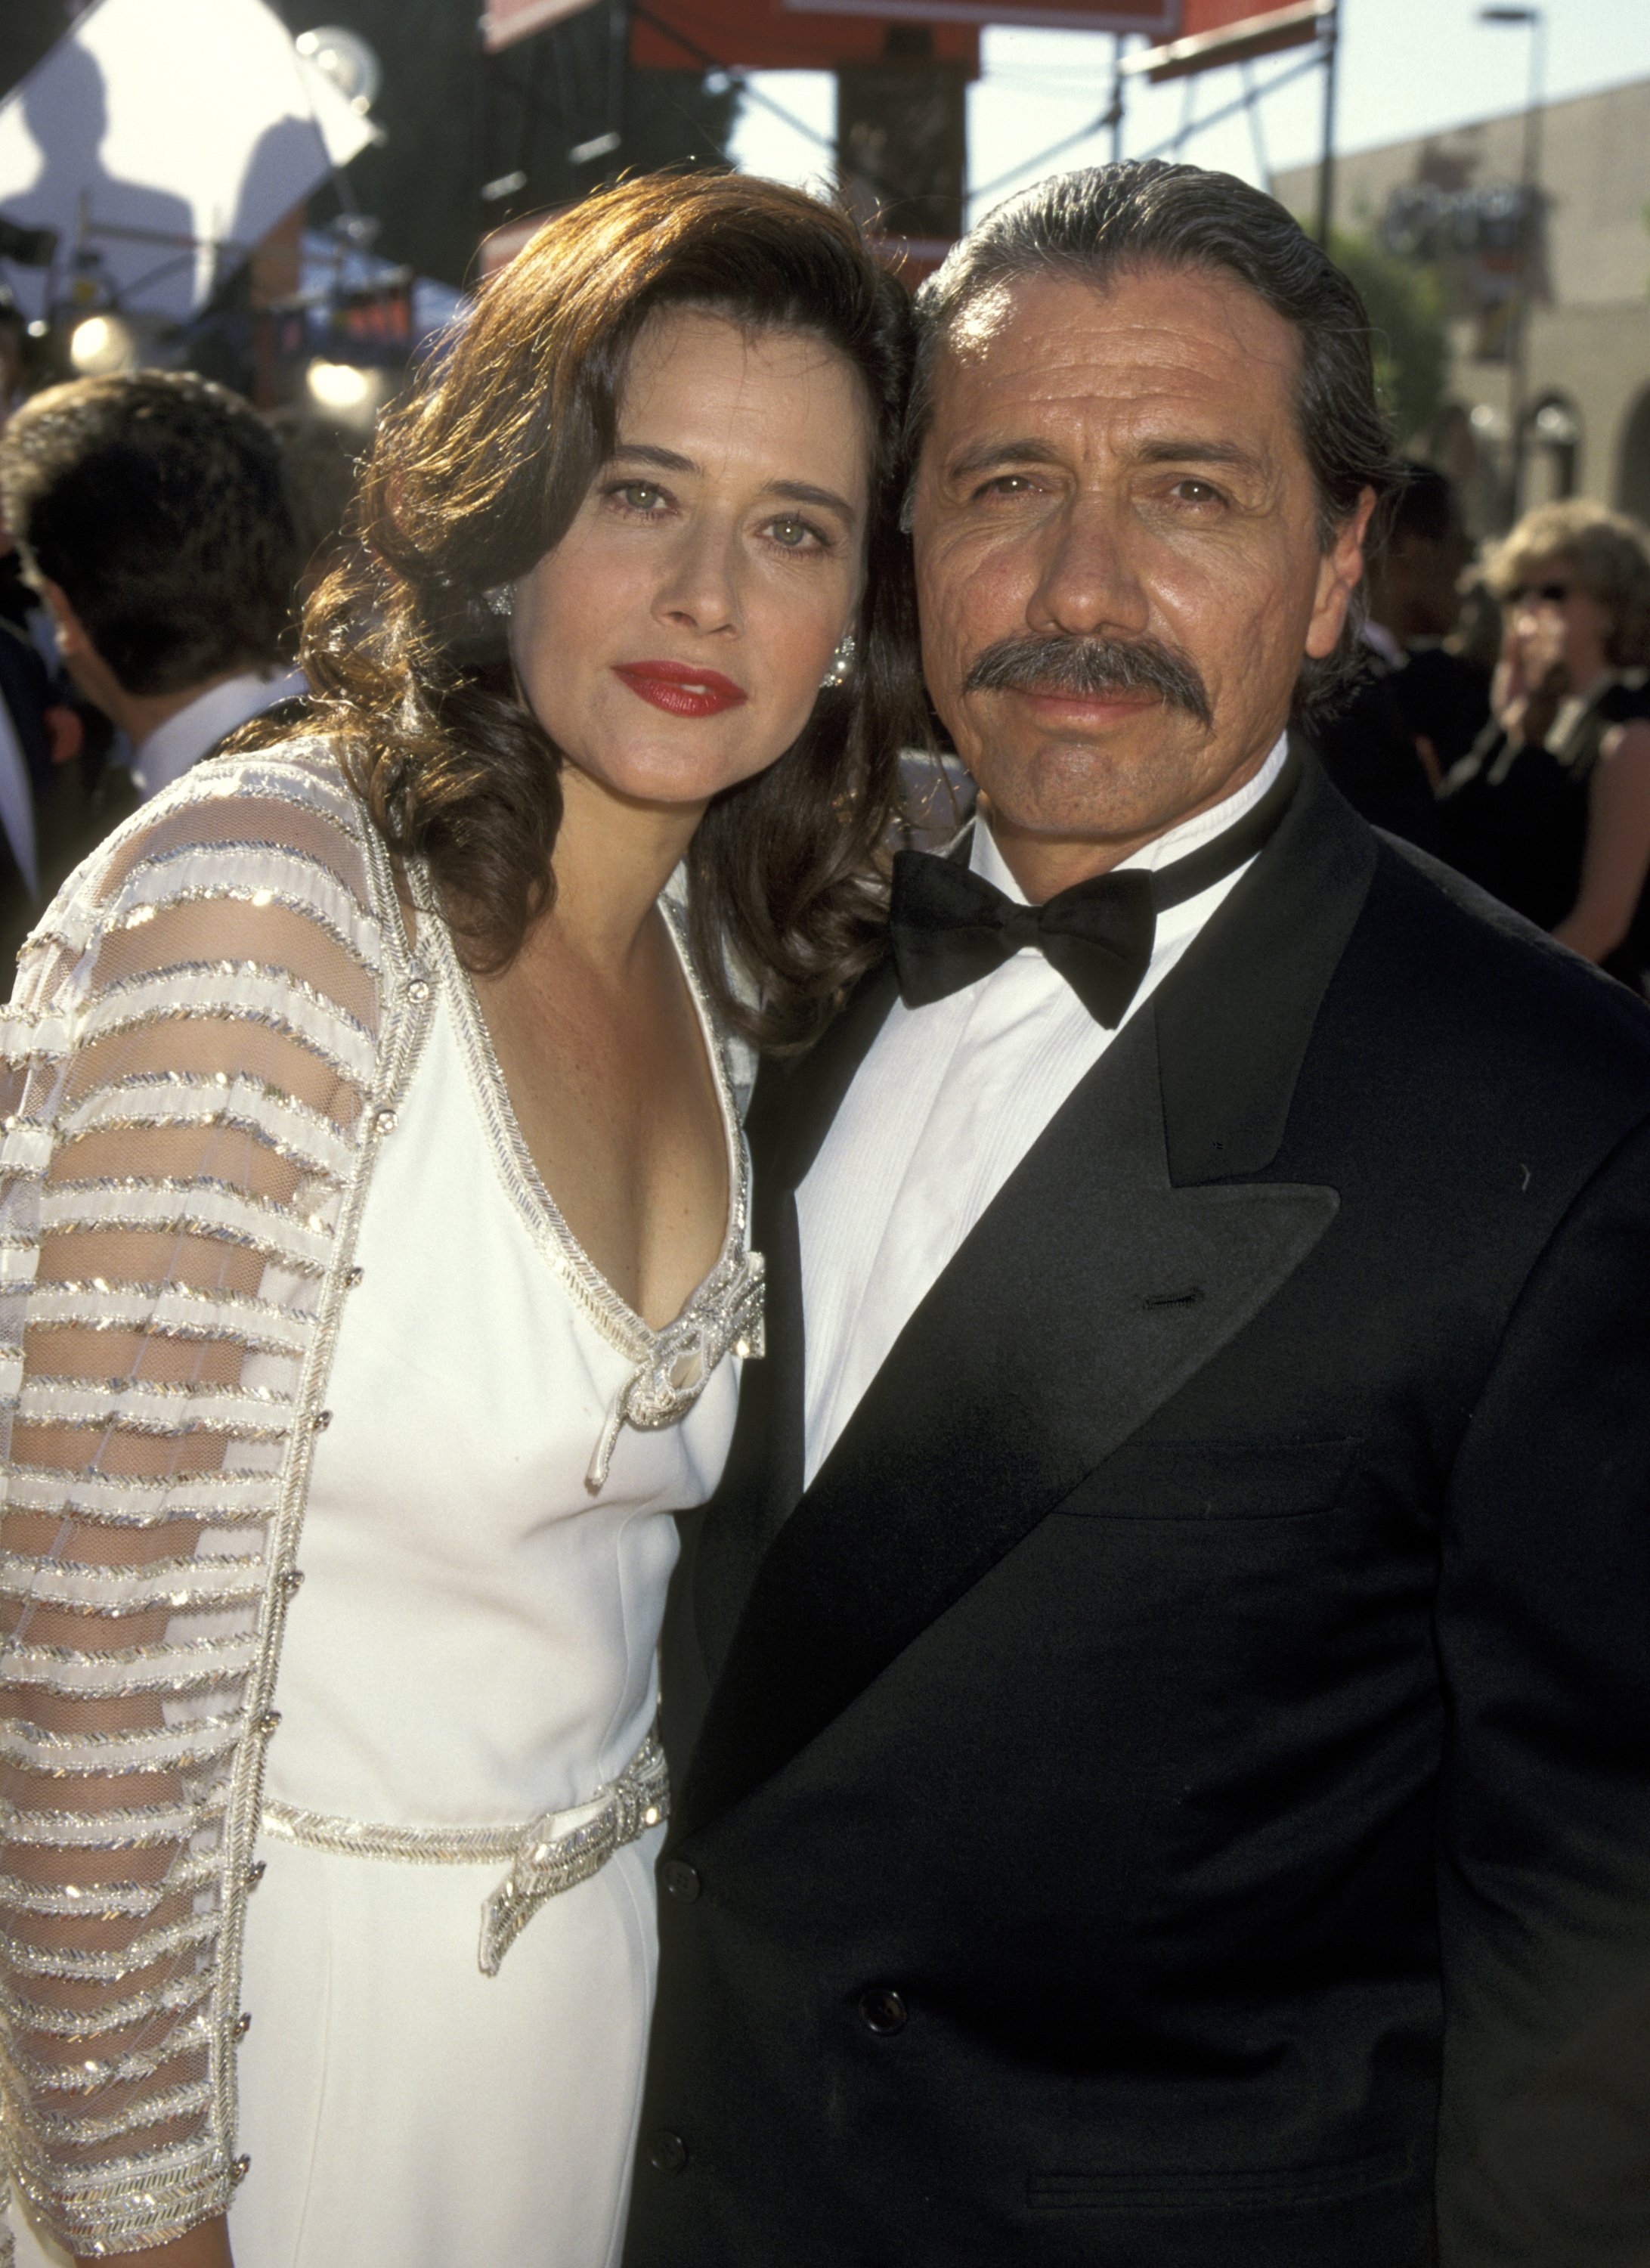 Lorraine Bracco and Edward James Olmos at the 47th Annual Primetime Emmy Awards, September 1995 | Photo: Getty Images